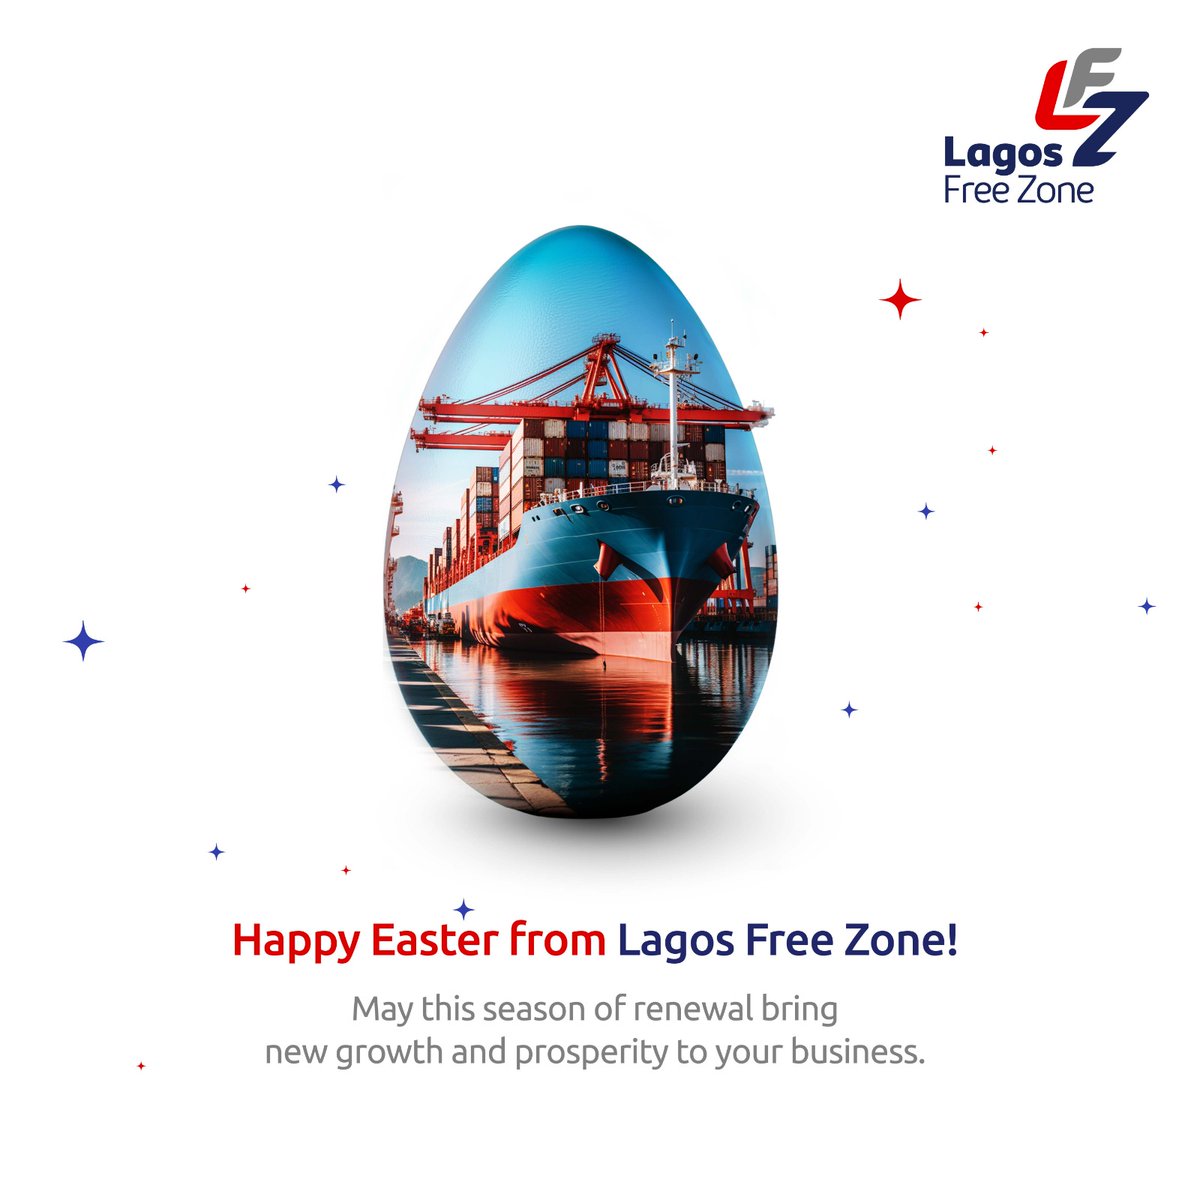 LFZ propels your business to soar to greater heights. With our efficient logistics, prime location, and conducive business environment, we offer the perfect setting for your ventures to flourish. Here’s wishing you a joyful Easter weekend filled with amazing new opportunities!